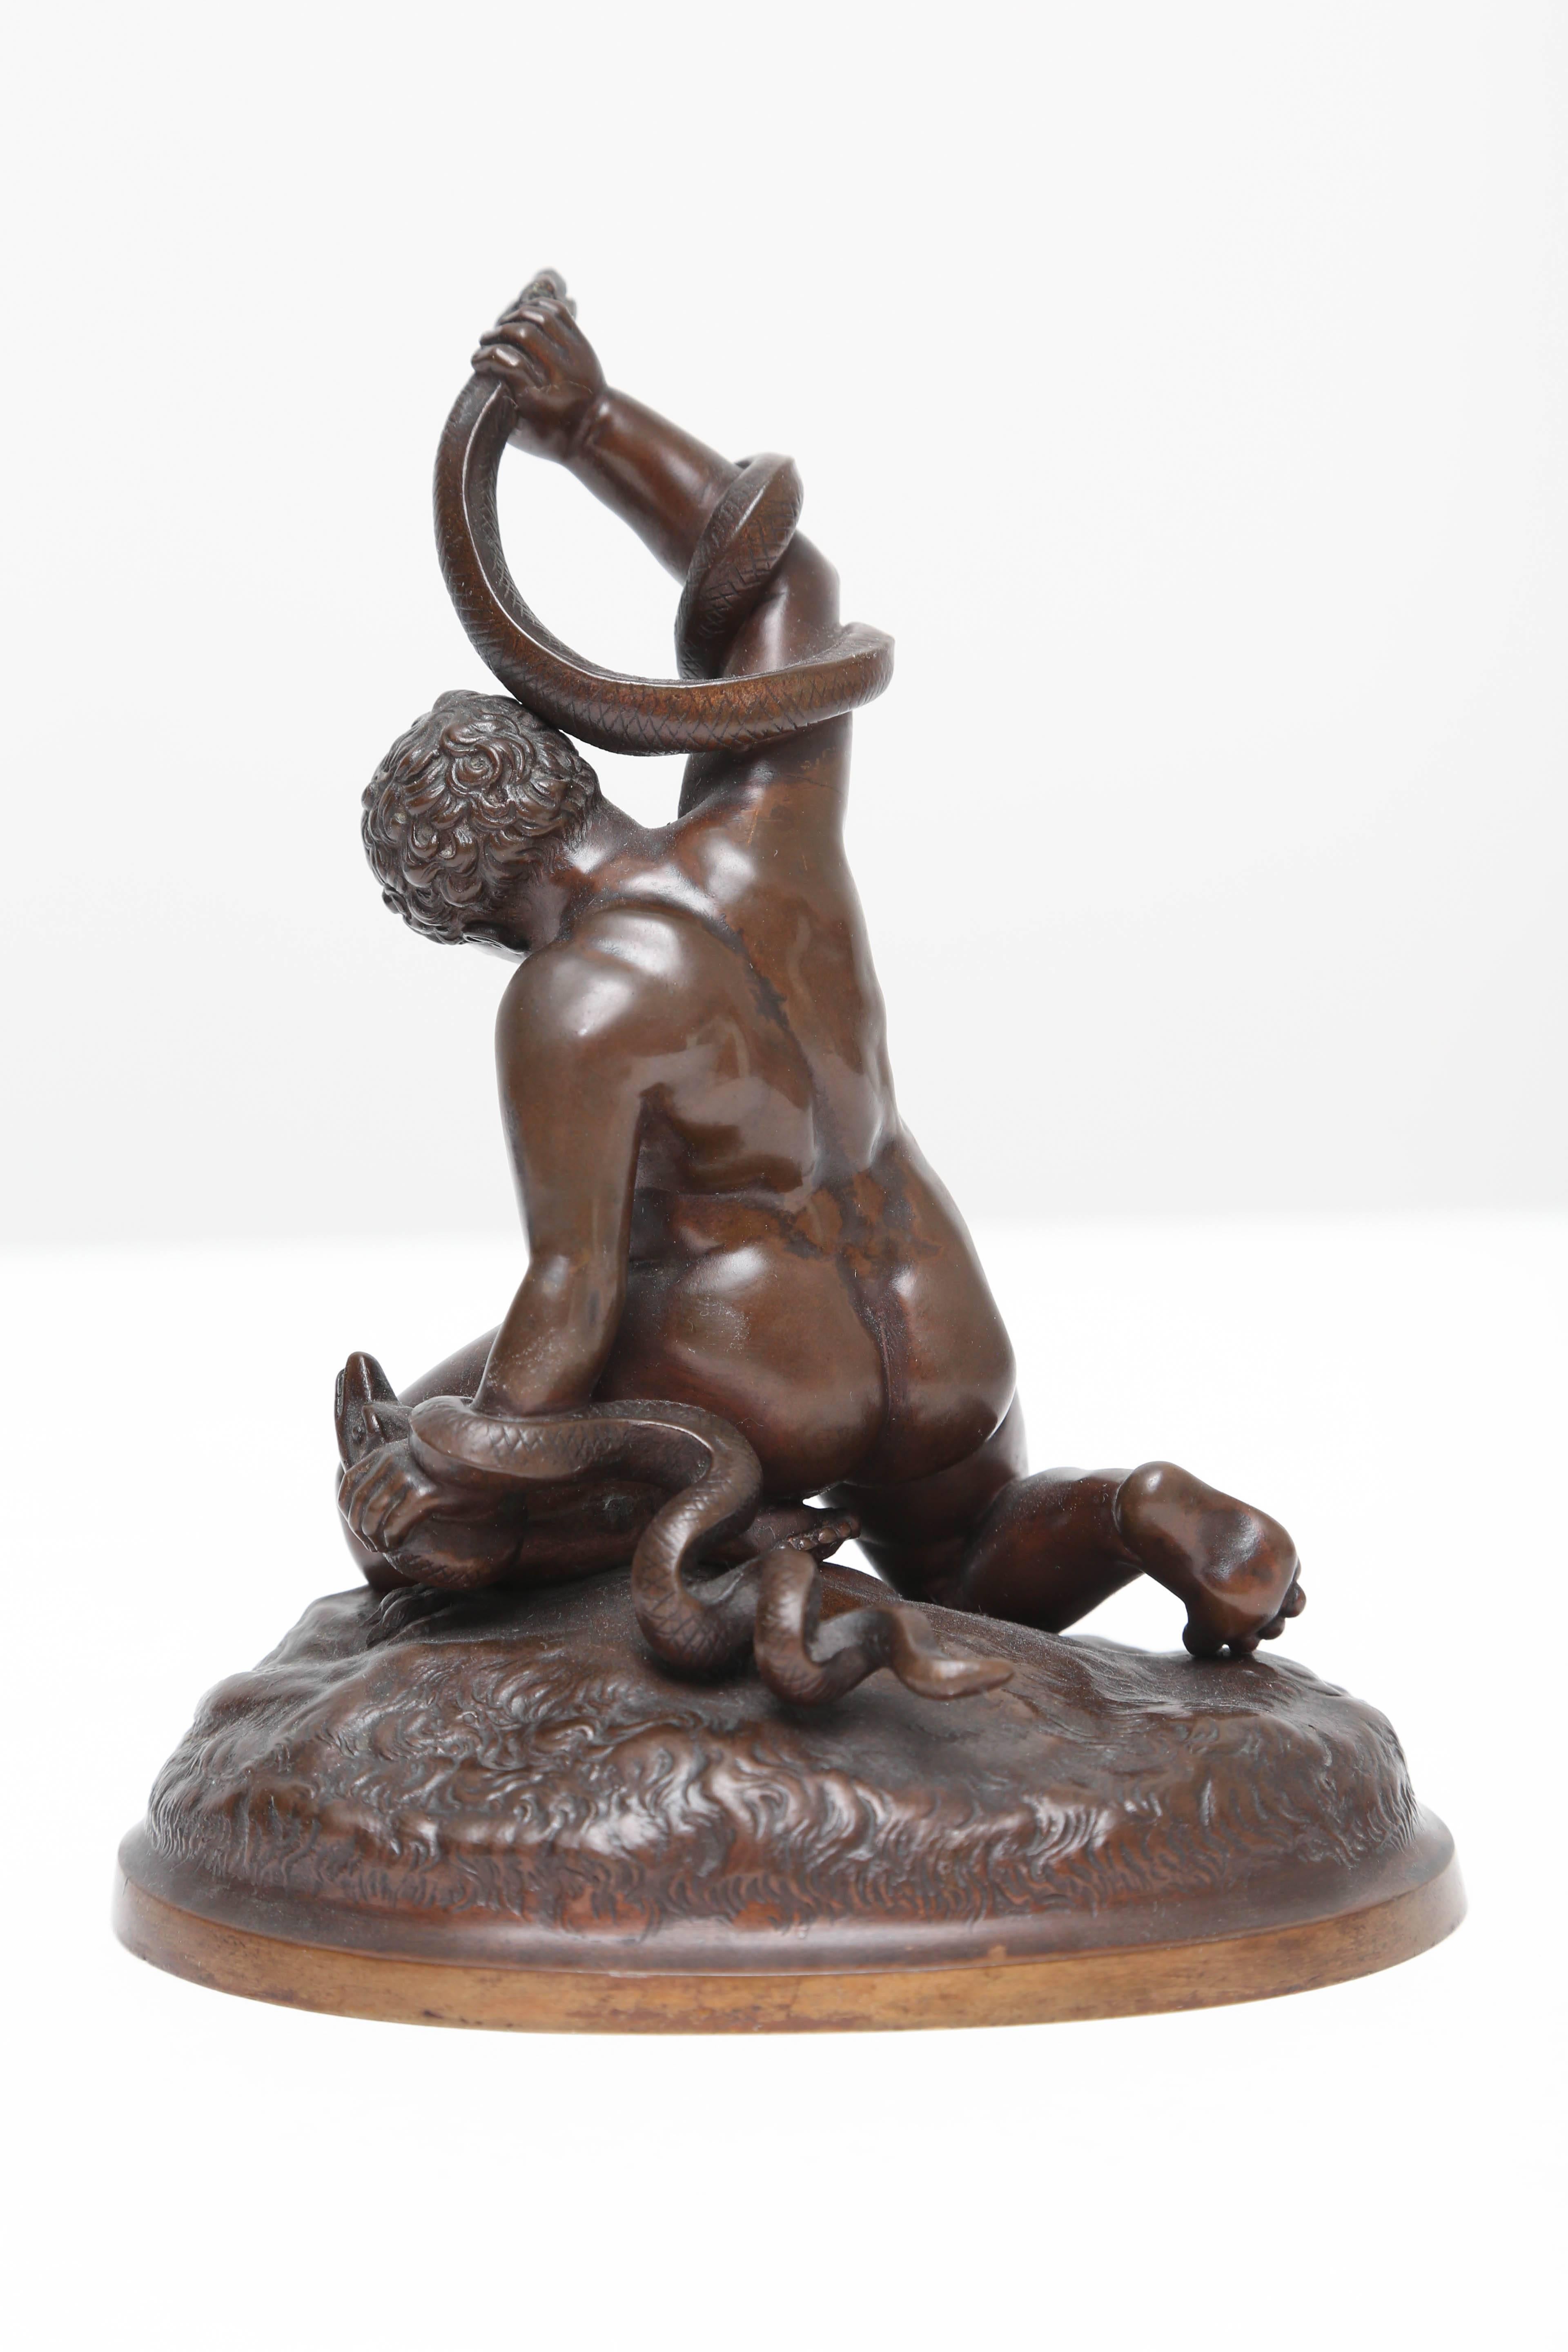 Italian Bronze of the Young Hercules Wrestling with Serpents, Italy, 18th Century